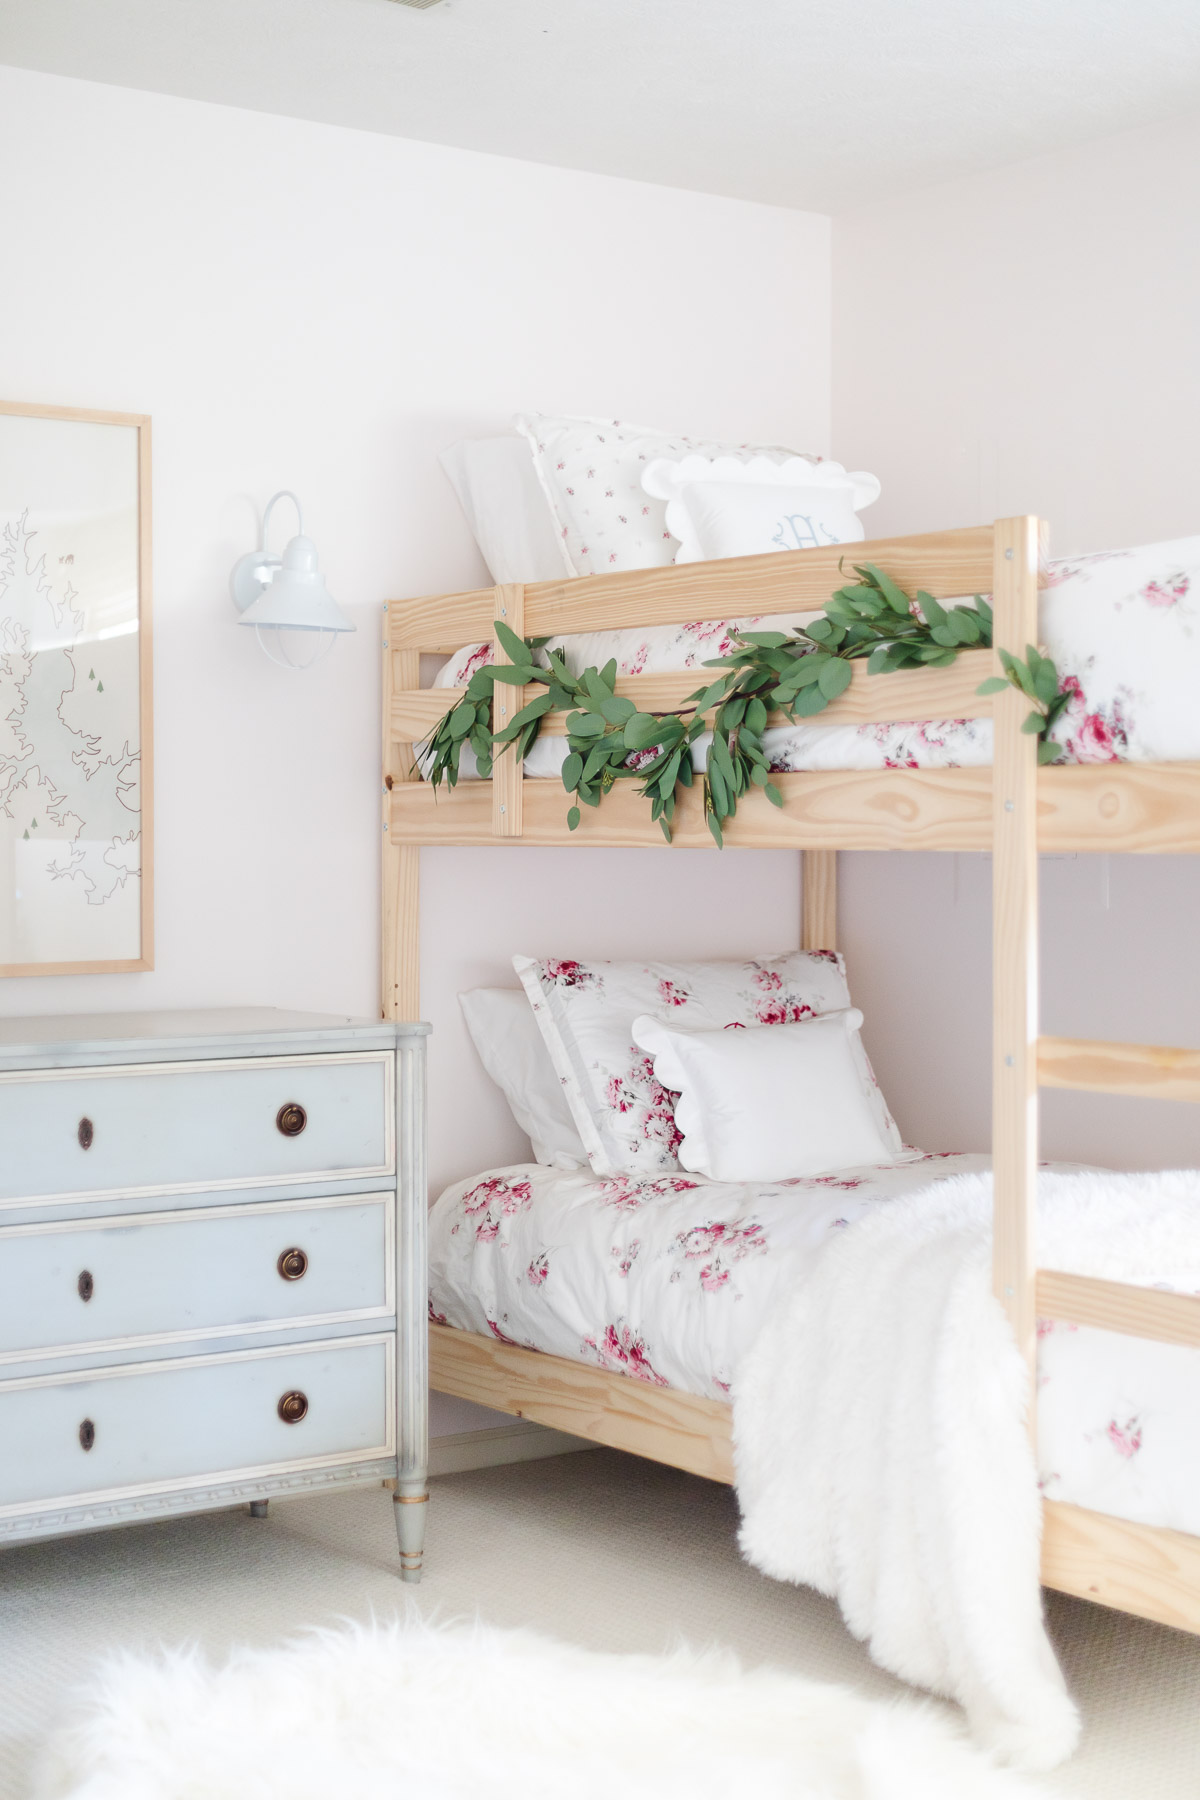 A girl's bedroom with bunk beds and a dresser, decorated with faux eucalyptus garland for Christmas